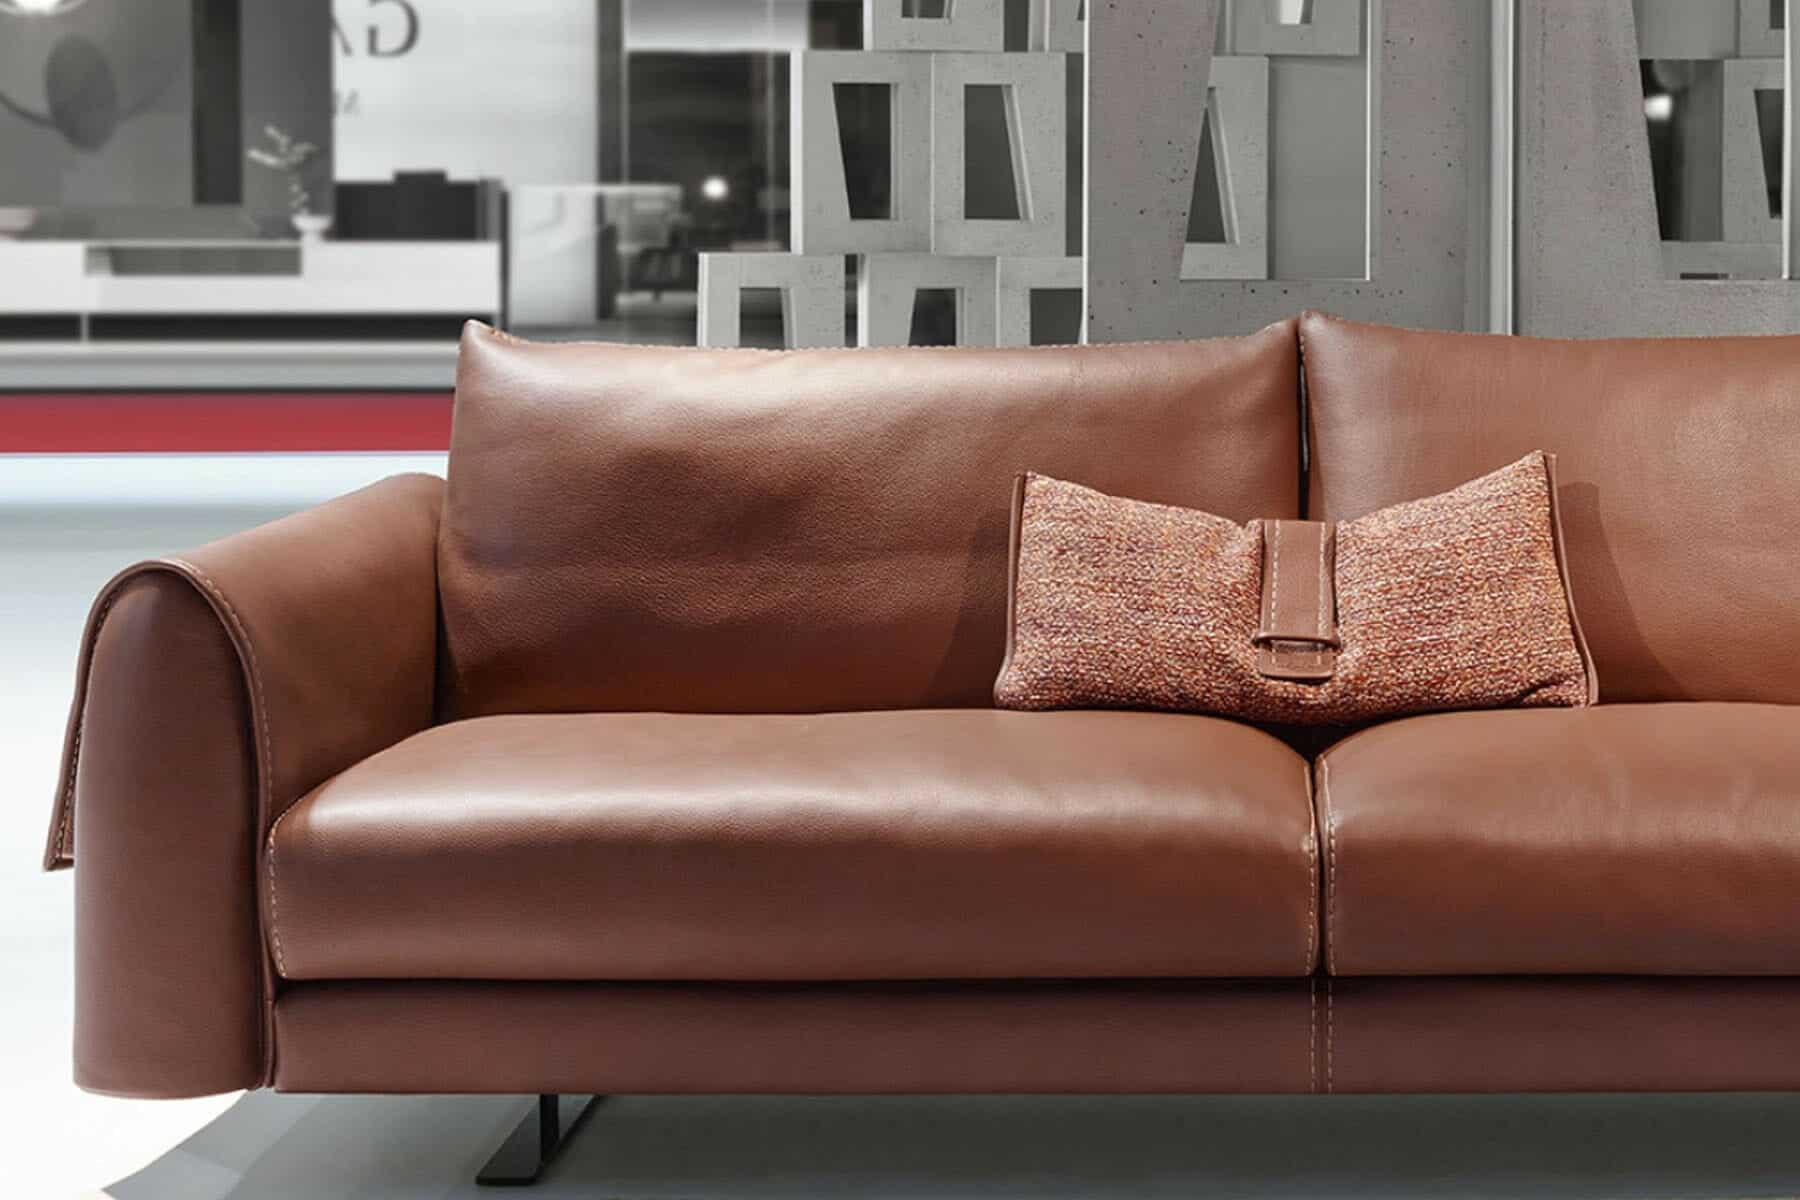 Karl Modern Brown Italian Leather Sofa With Storage Compartment